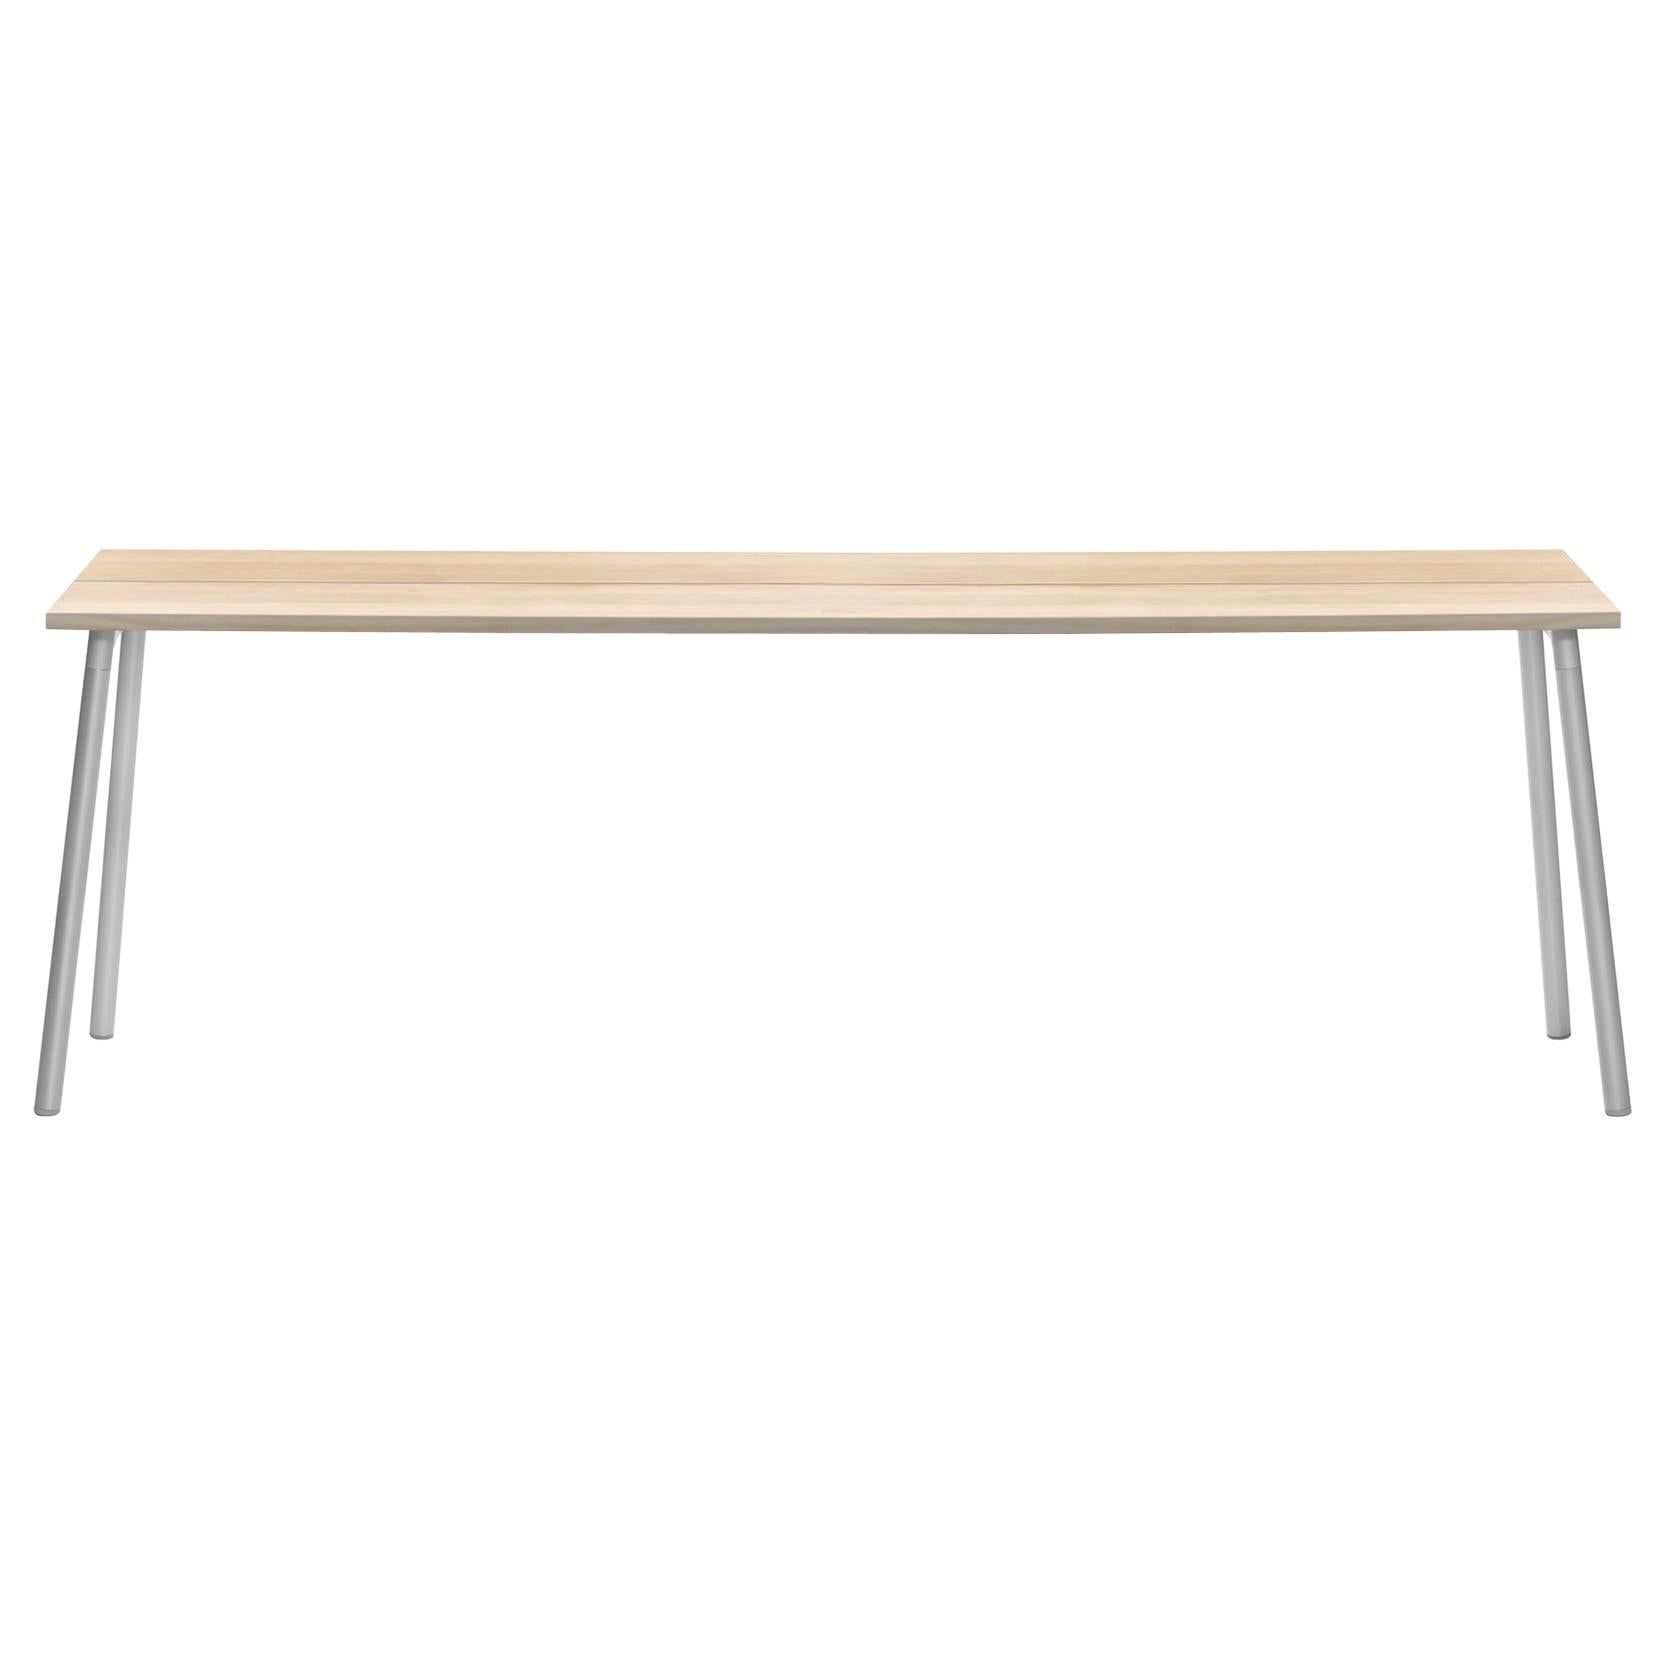 Emeco Run 86" Side Table Aluminum Frame & Wood Top by Sam Hecht and Kim Colin